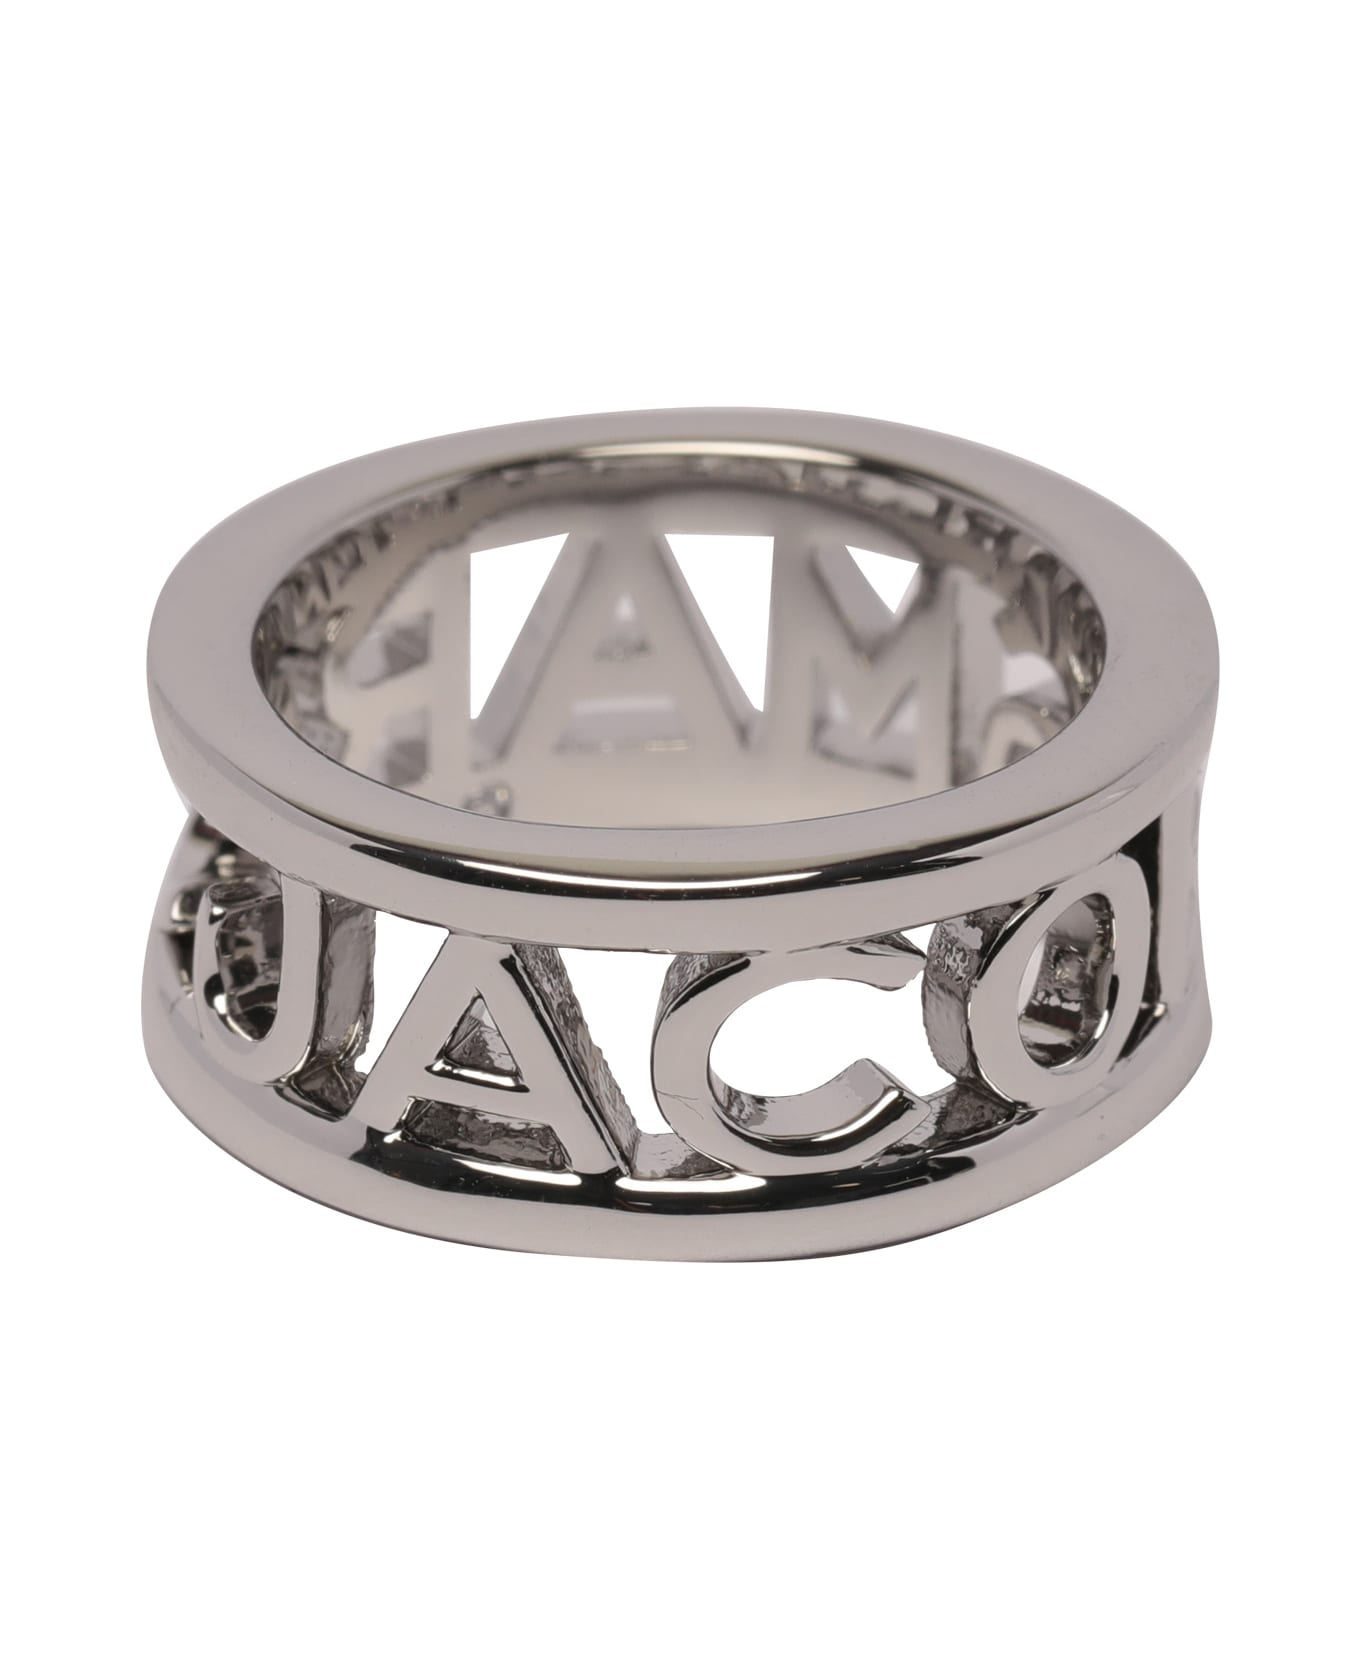 Marc Jacobs The Monogram Ring - ARGENTO リング